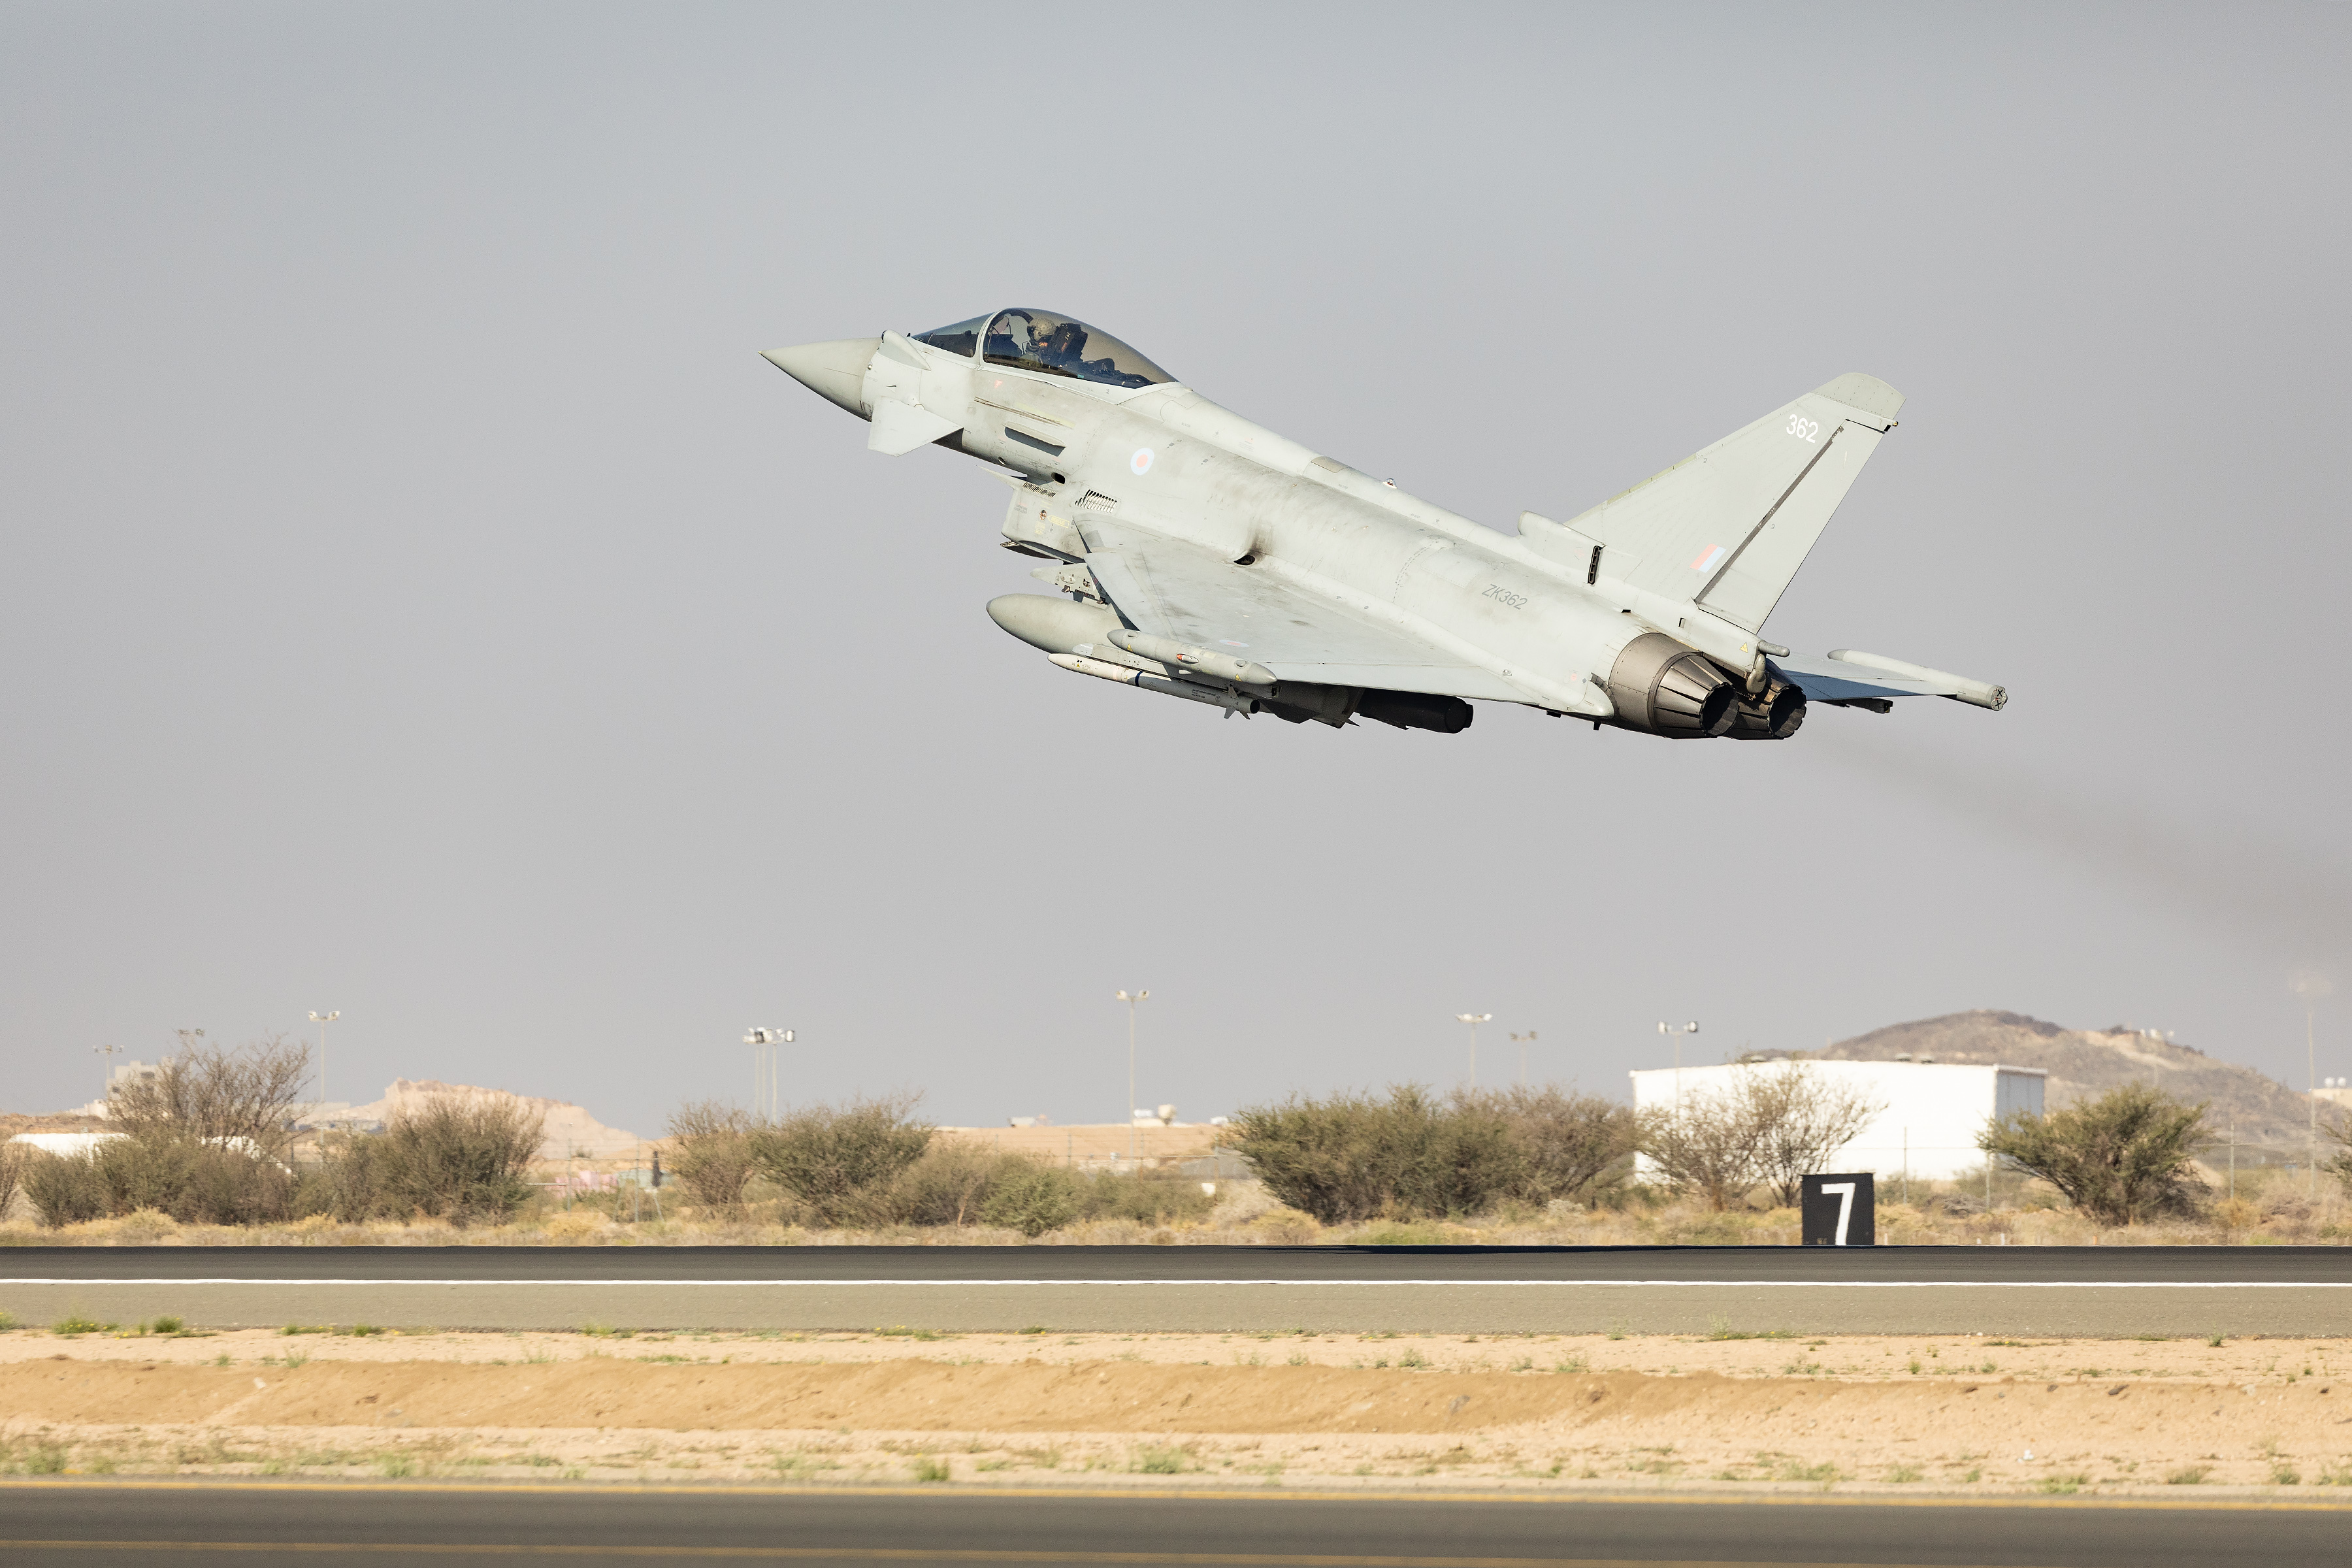 Image shows RAF Typhoon taking off from the airfield.